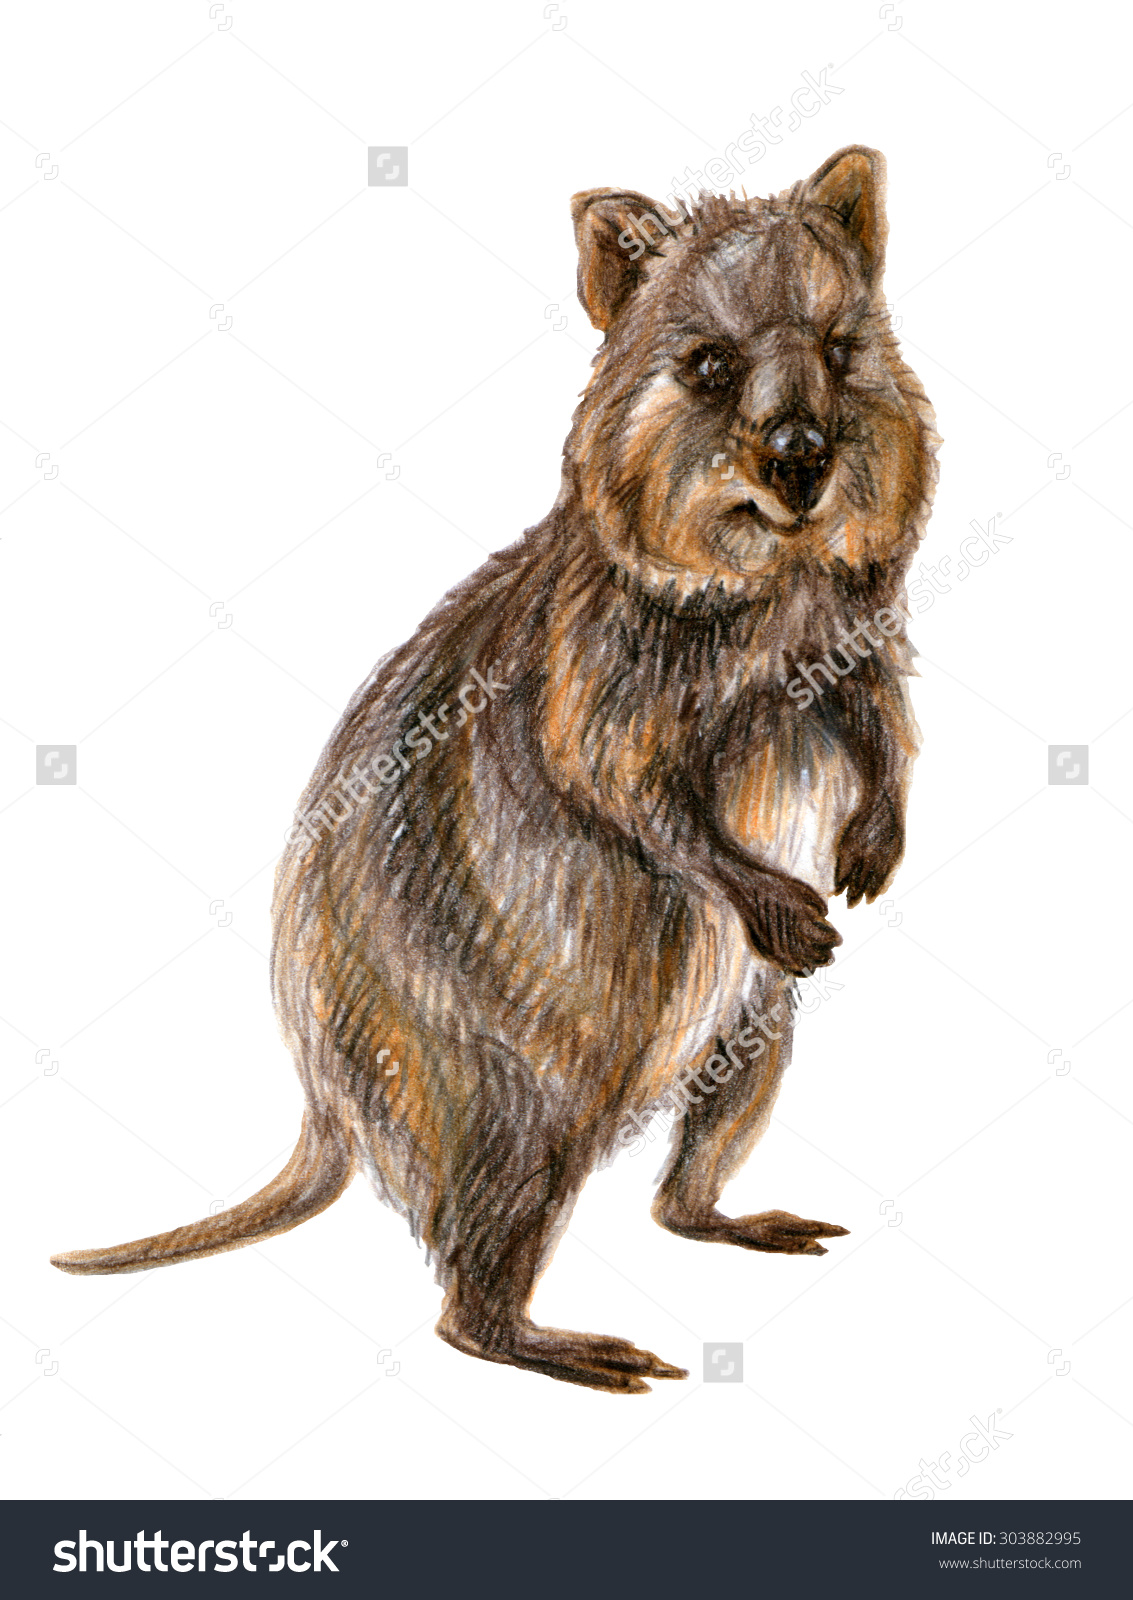 Quokka clipart #8, Download drawings